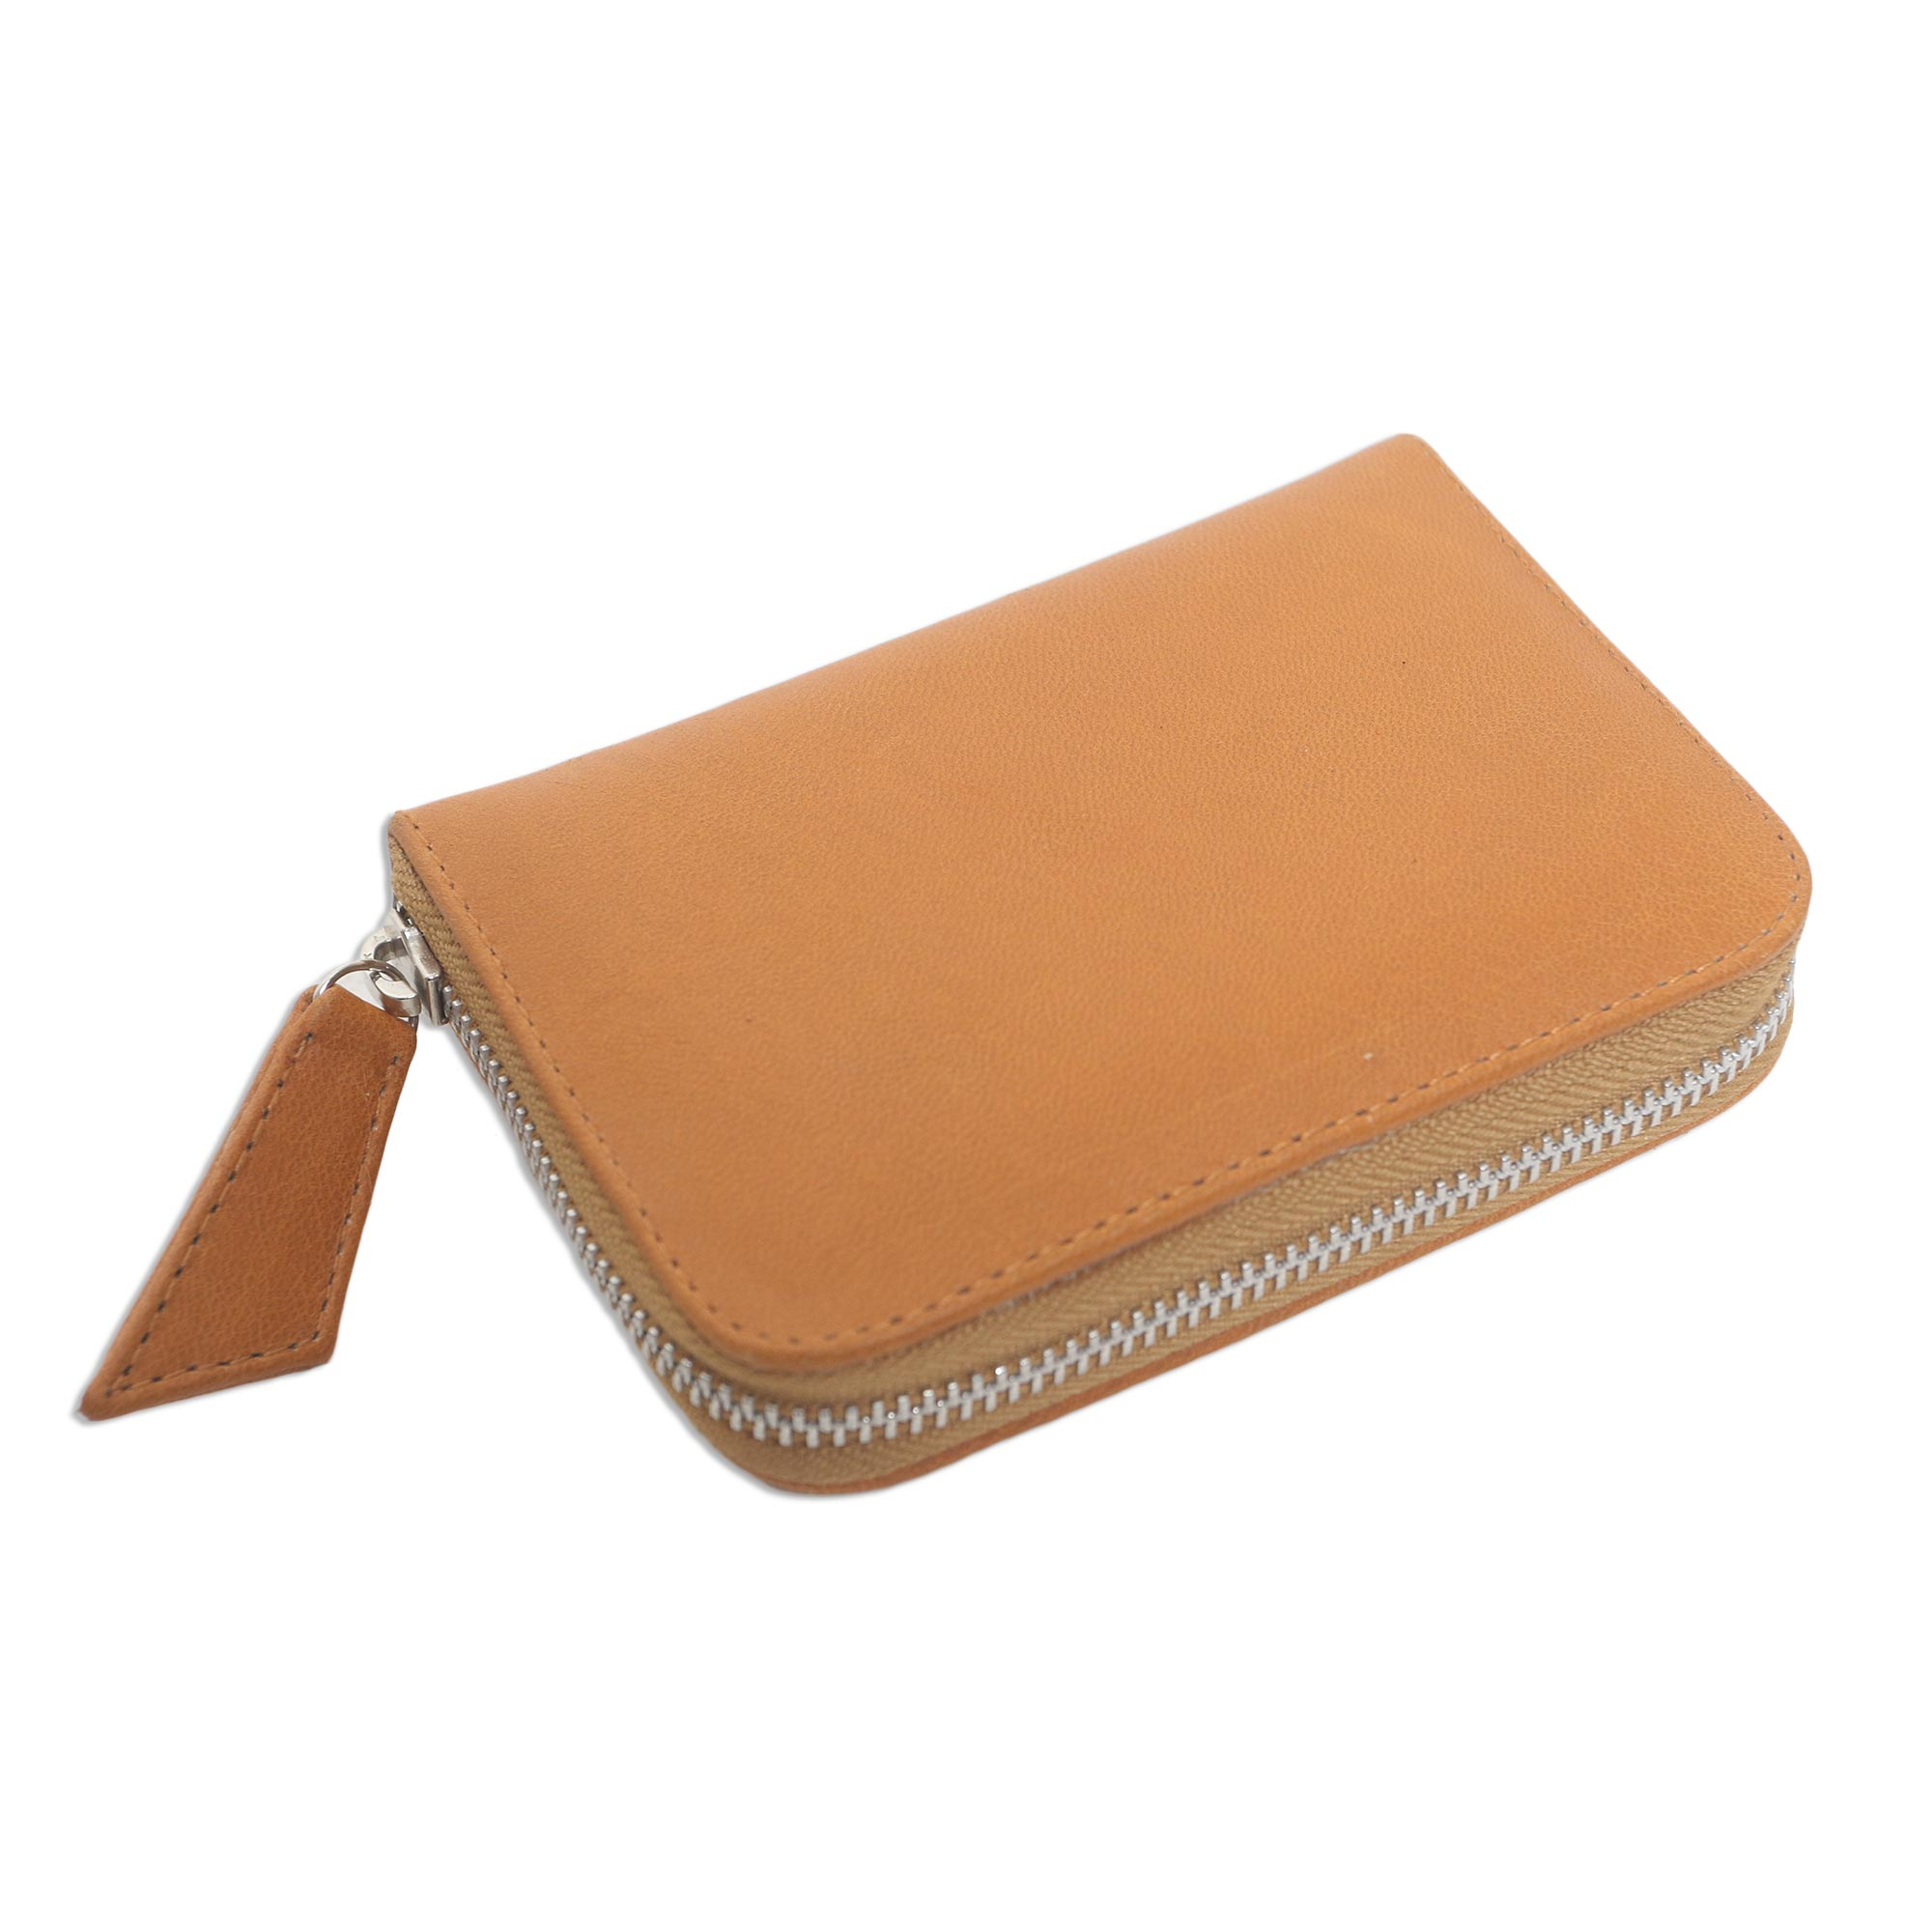 Ginger Colored Leather Zippered Wallet - Ginger Simplicity | NOVICA